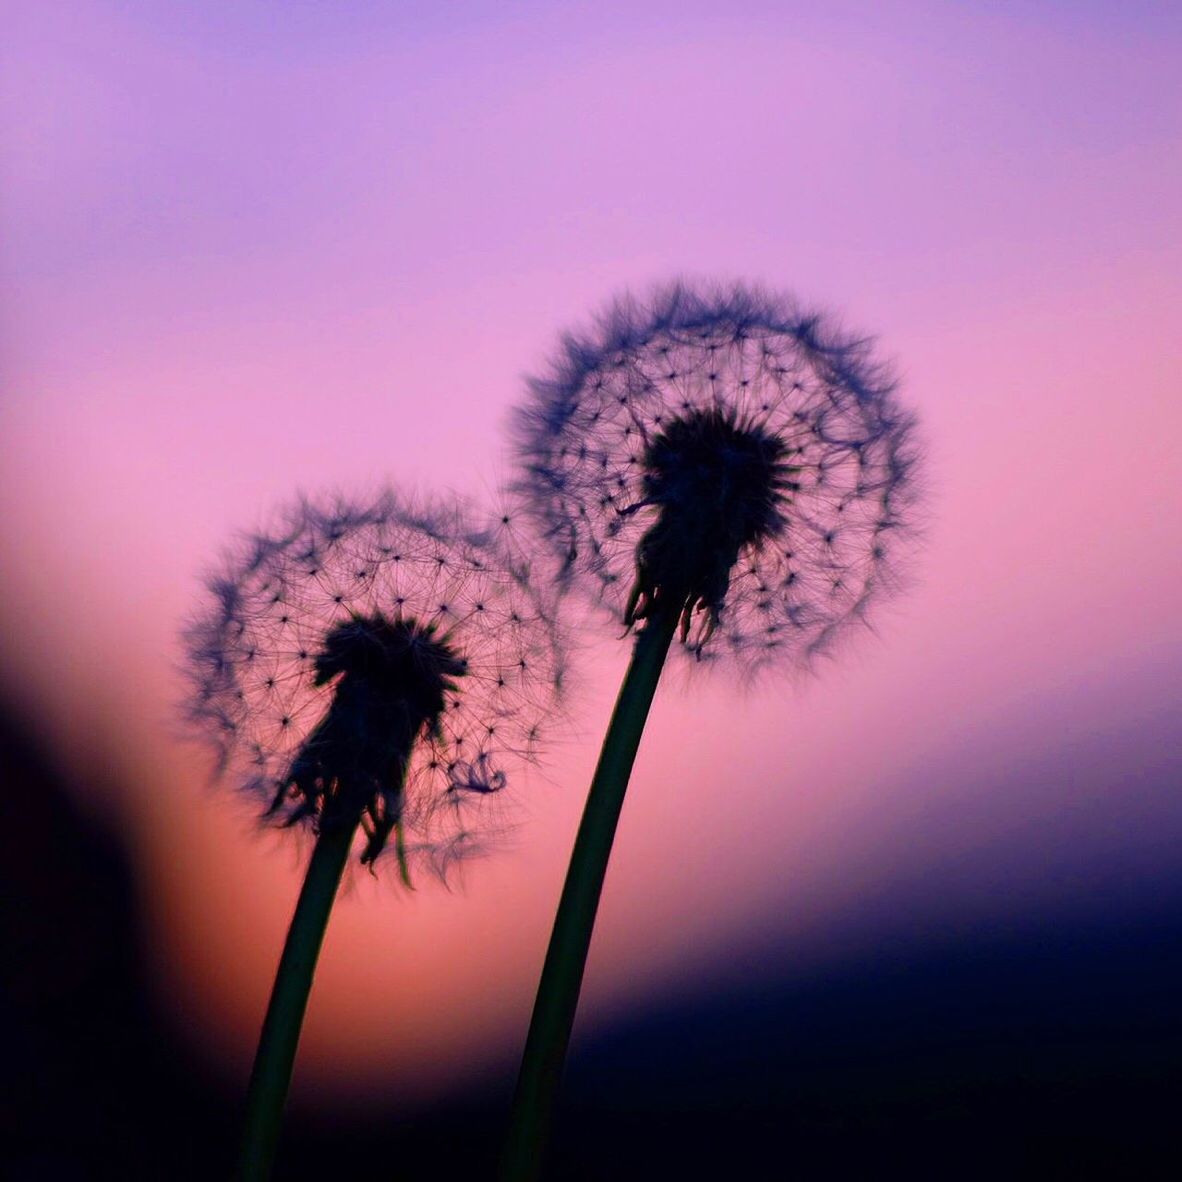 flower, dandelion, fragility, growth, flower head, freshness, stem, beauty in nature, nature, single flower, close-up, focus on foreground, dandelion seed, softness, plant, wildflower, uncultivated, silhouette, sky, no people